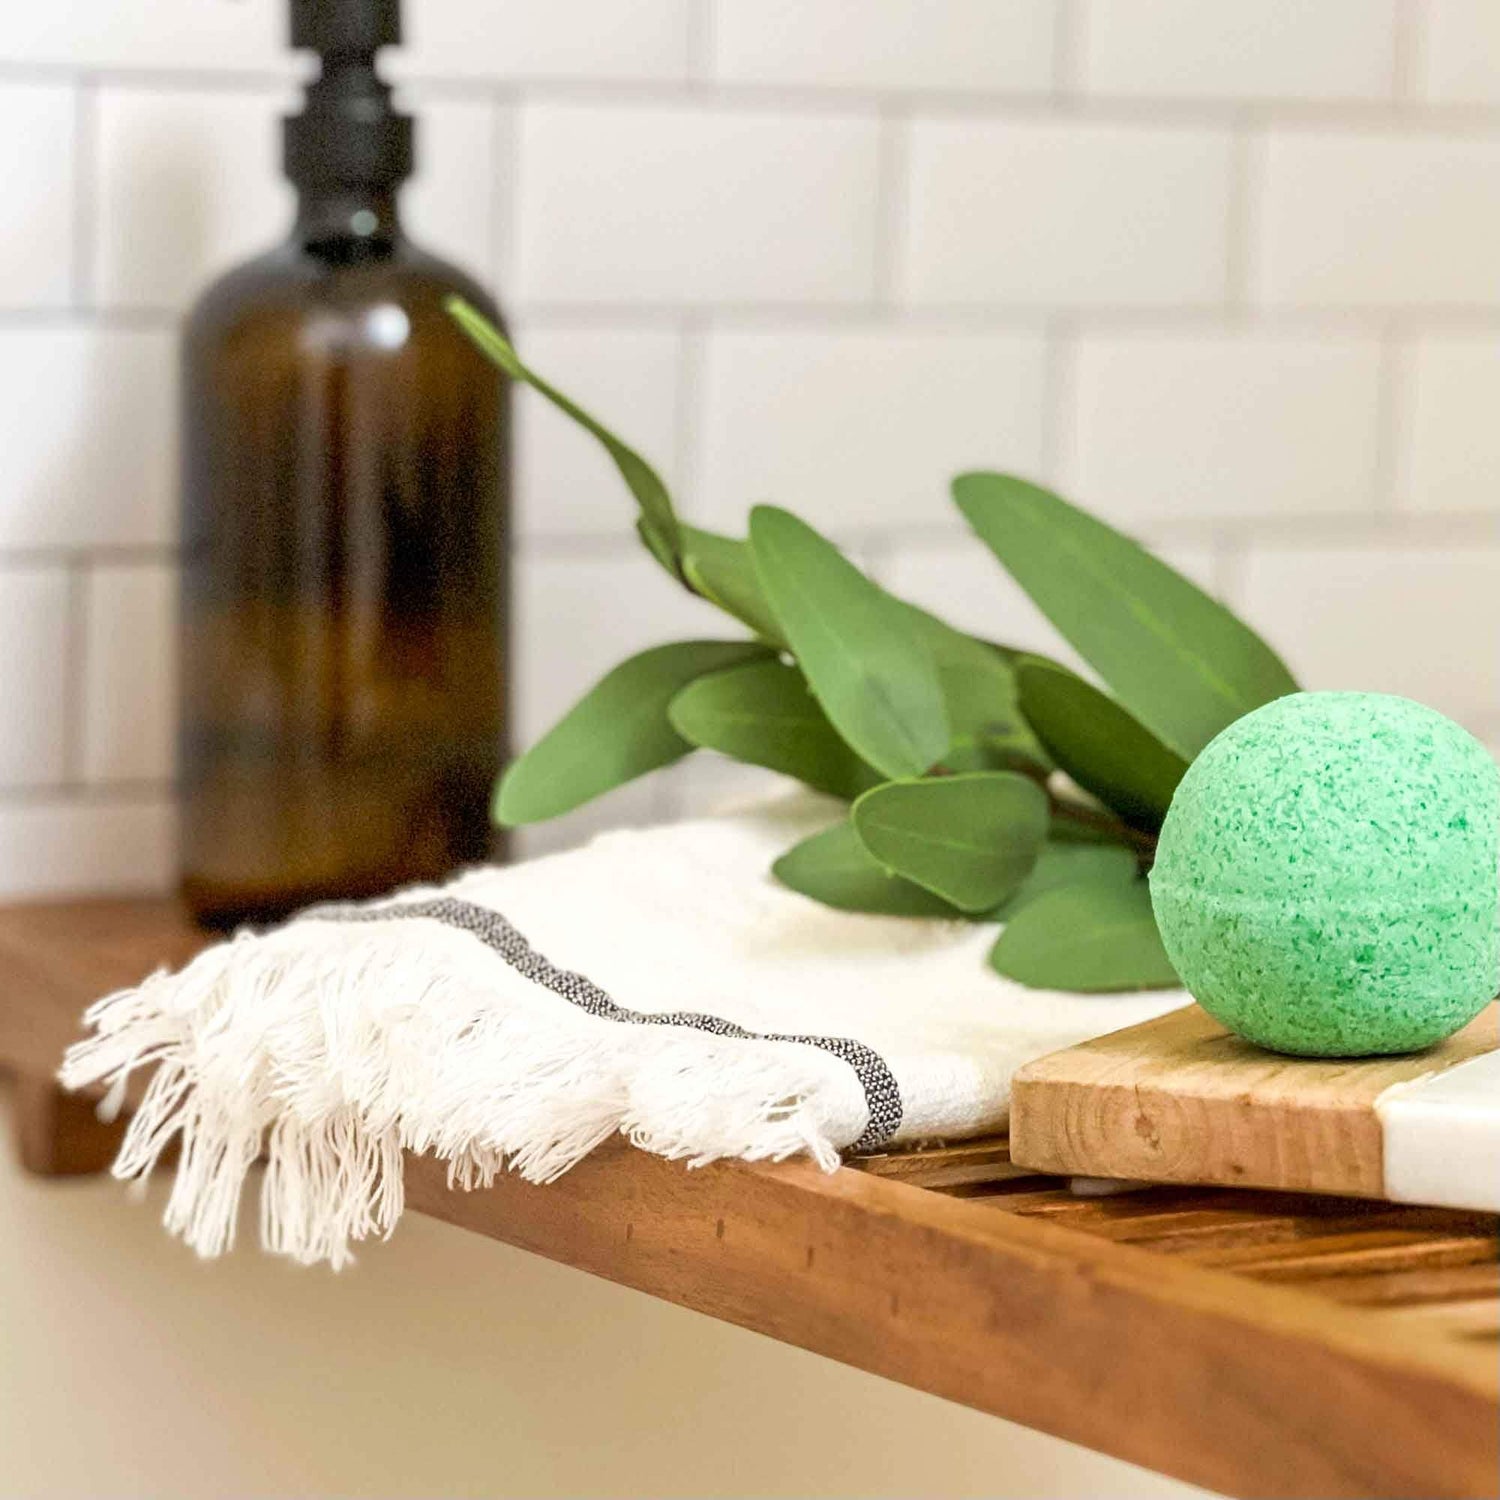 Relax and Rejuvenate with Cactus Flower Bath Bombs | Handmade, All-Natural, Vegan-Friendly Bath Bomb for Soothing and Moisturizing